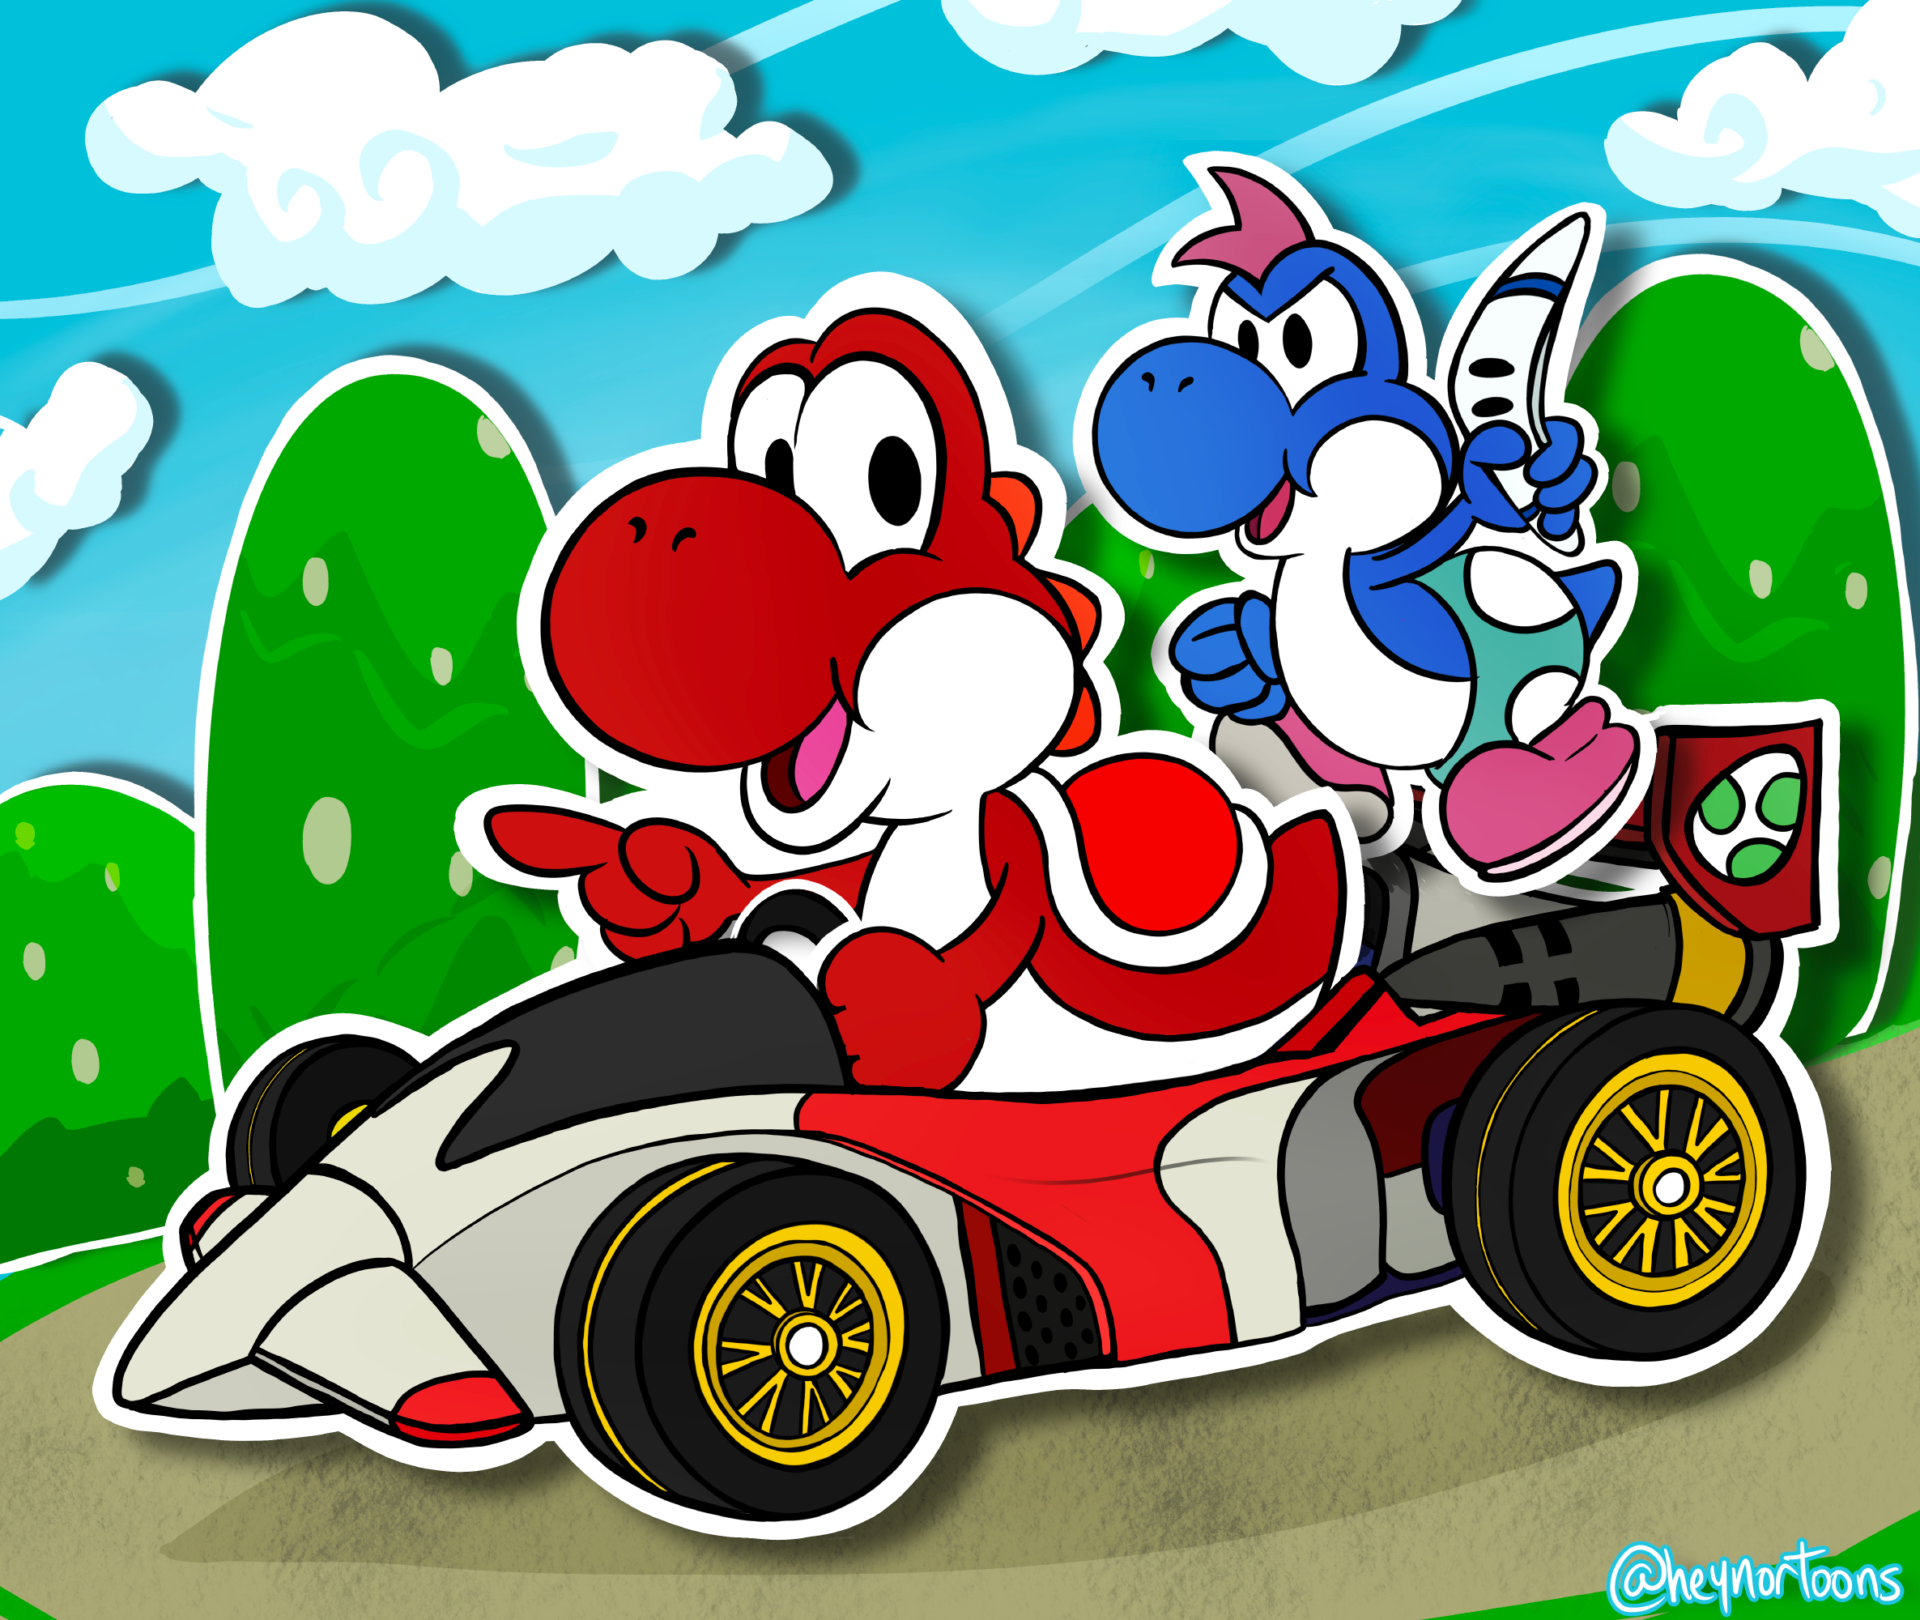 Paper Yoshi Kart - Red and Blue